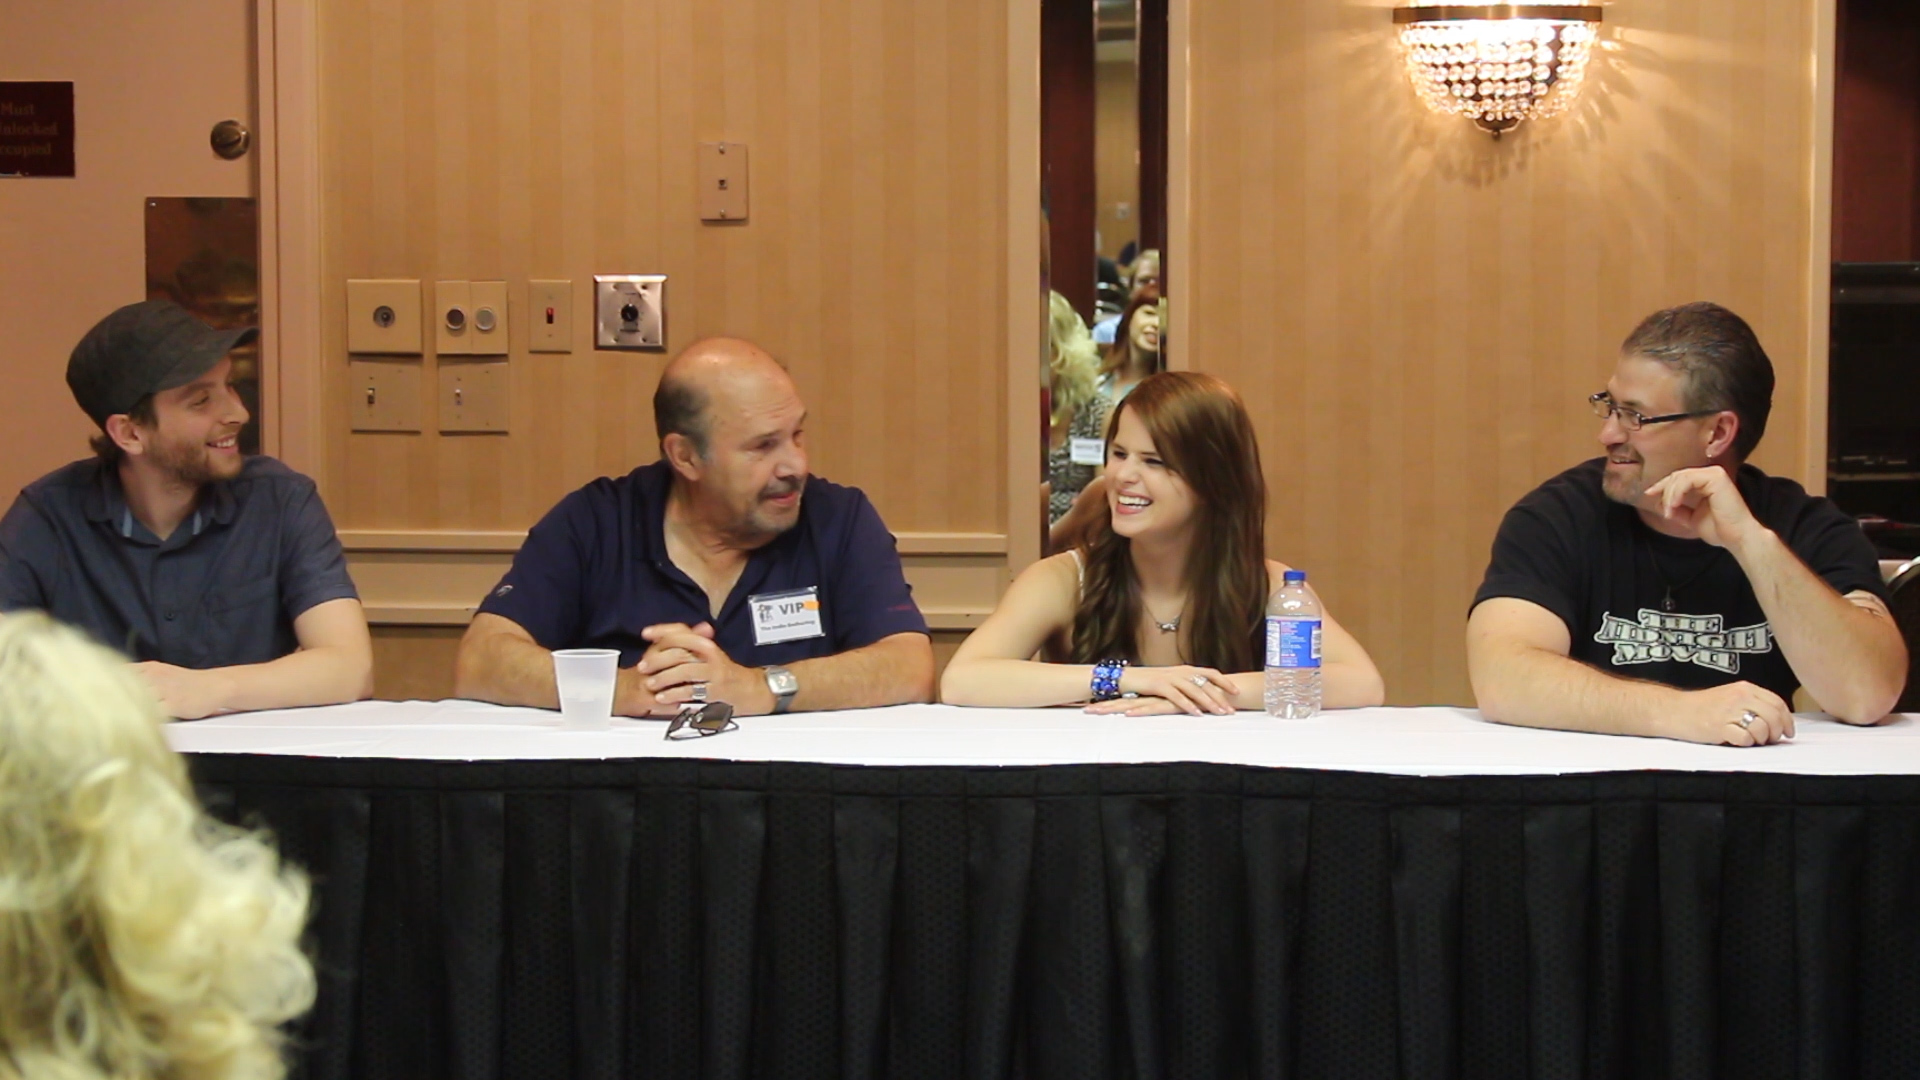 Still from the acting panel at The 2014 Indie Gathering International Film Festival.